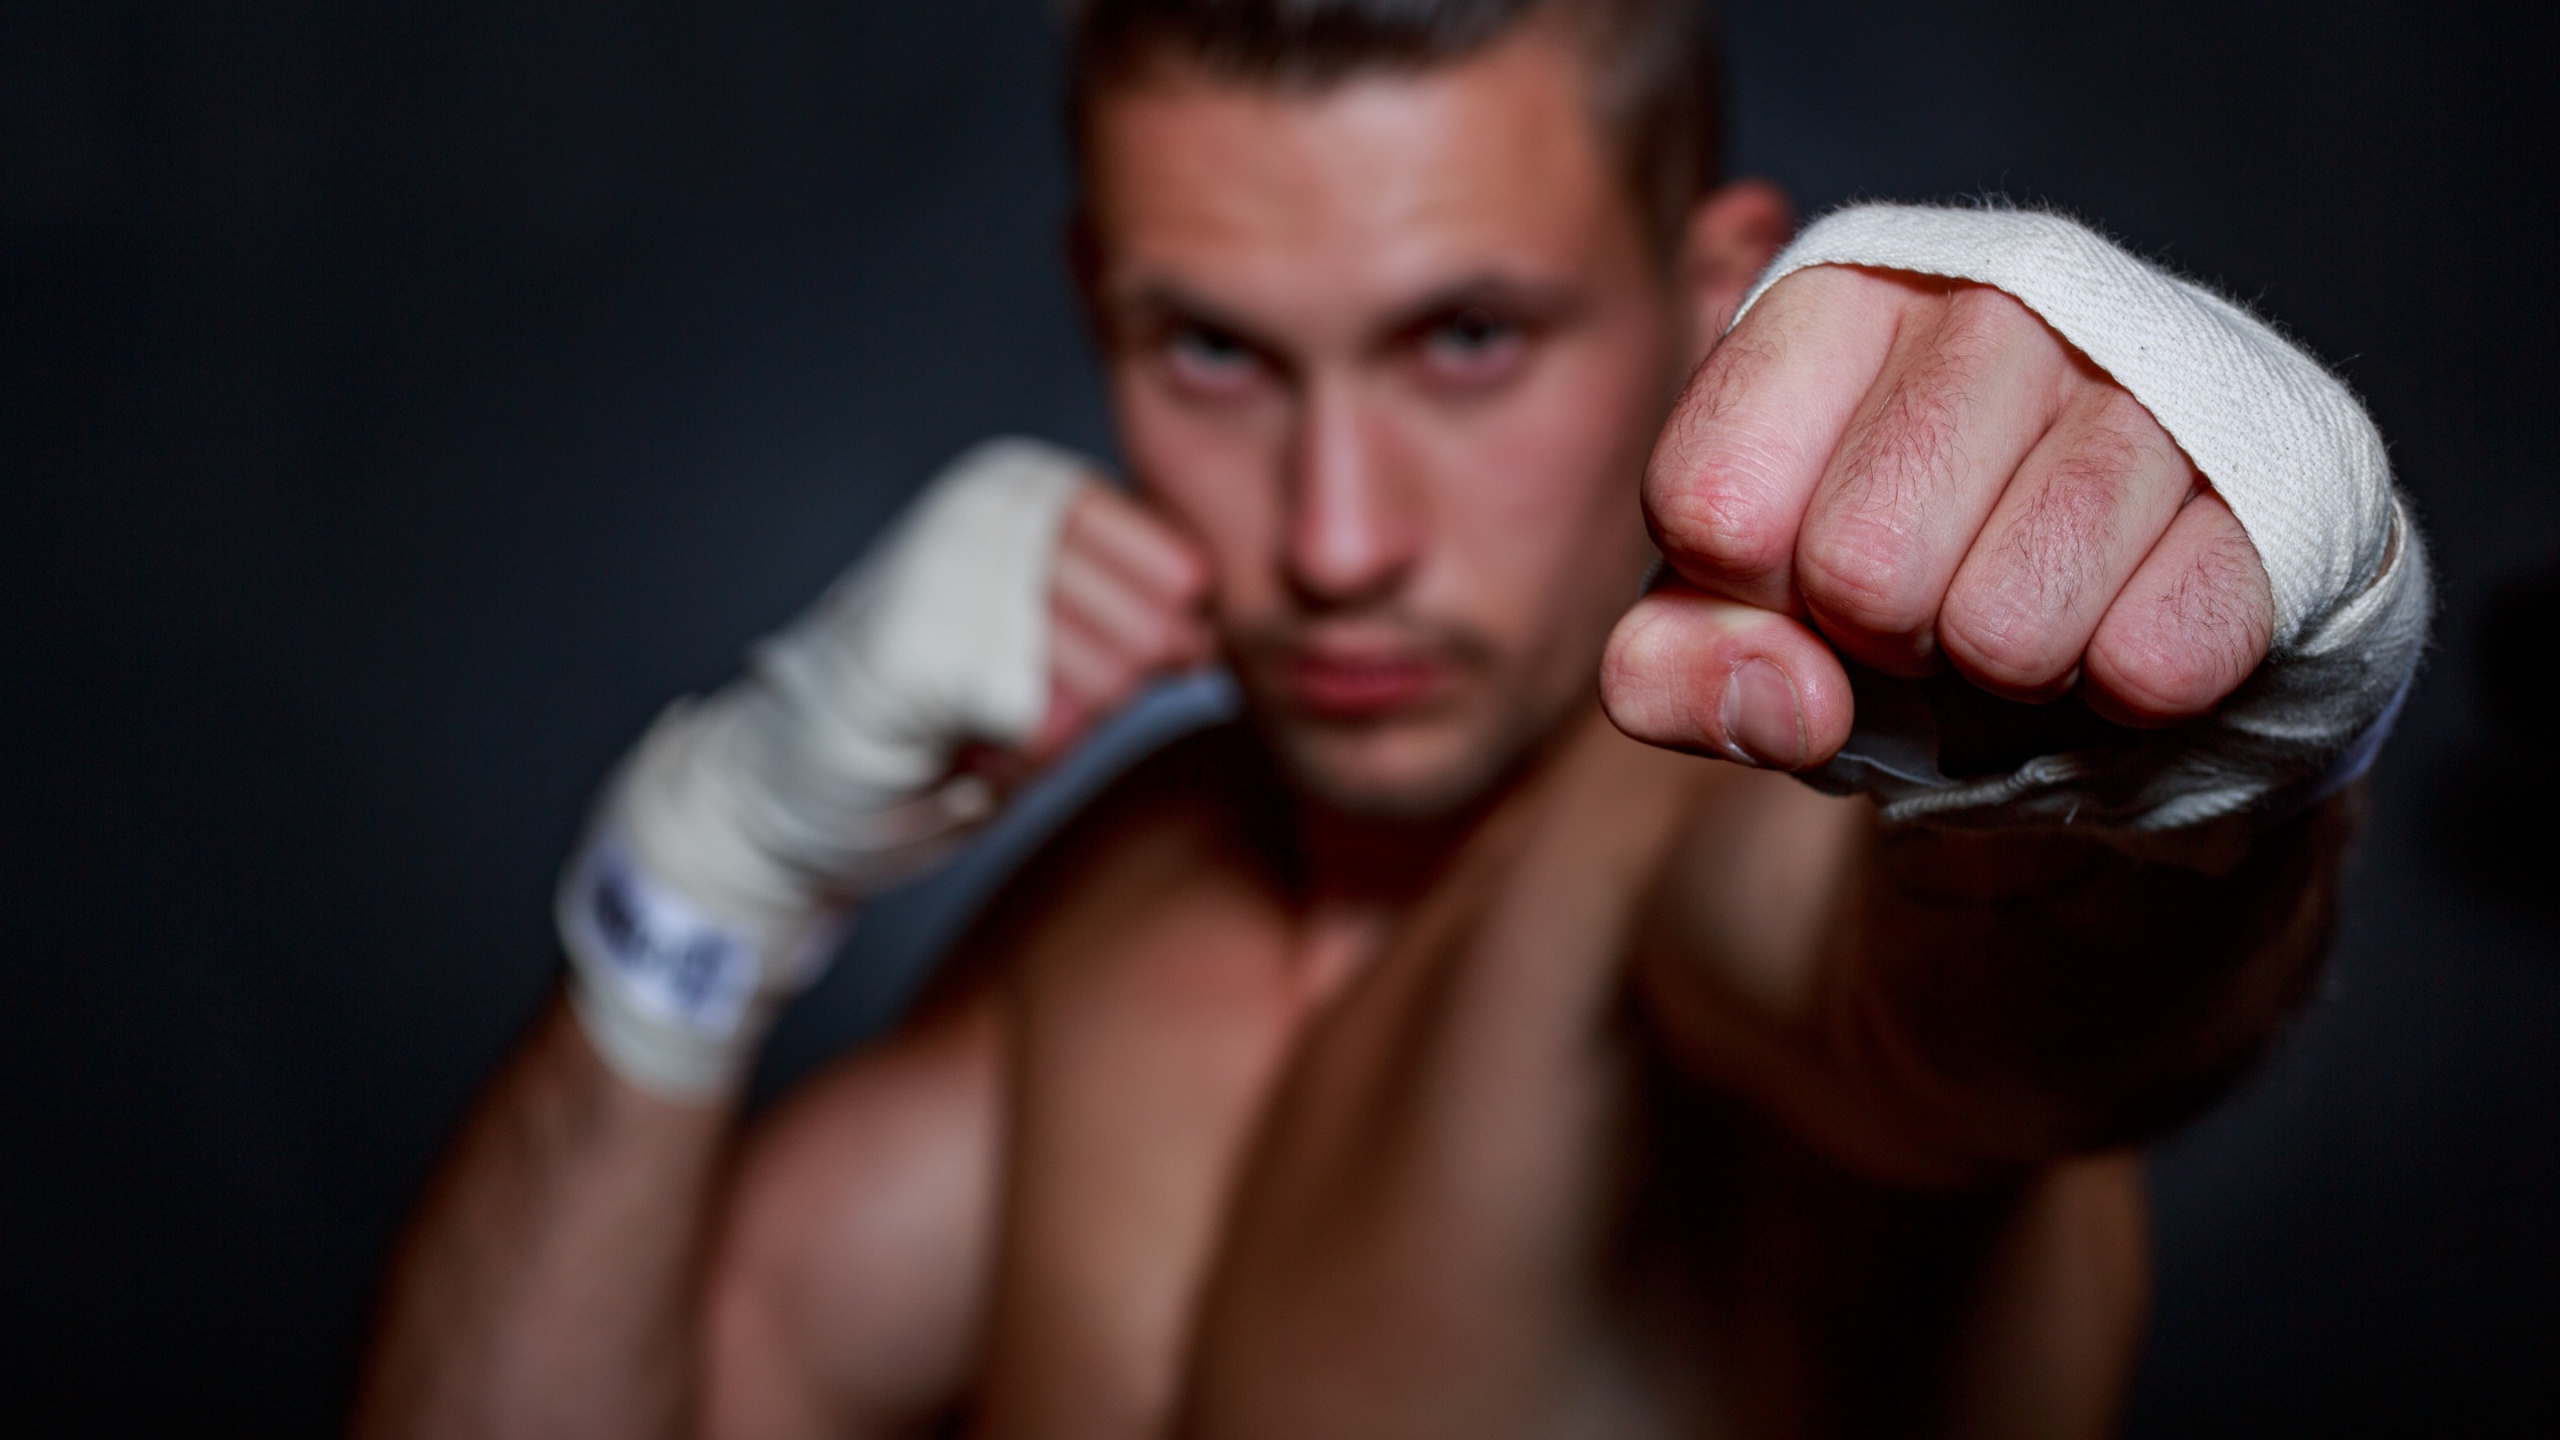 Boxing, Muscle, Bodybuilder, Arm, Hand. Wallpaper in 2560x1440 Resolution